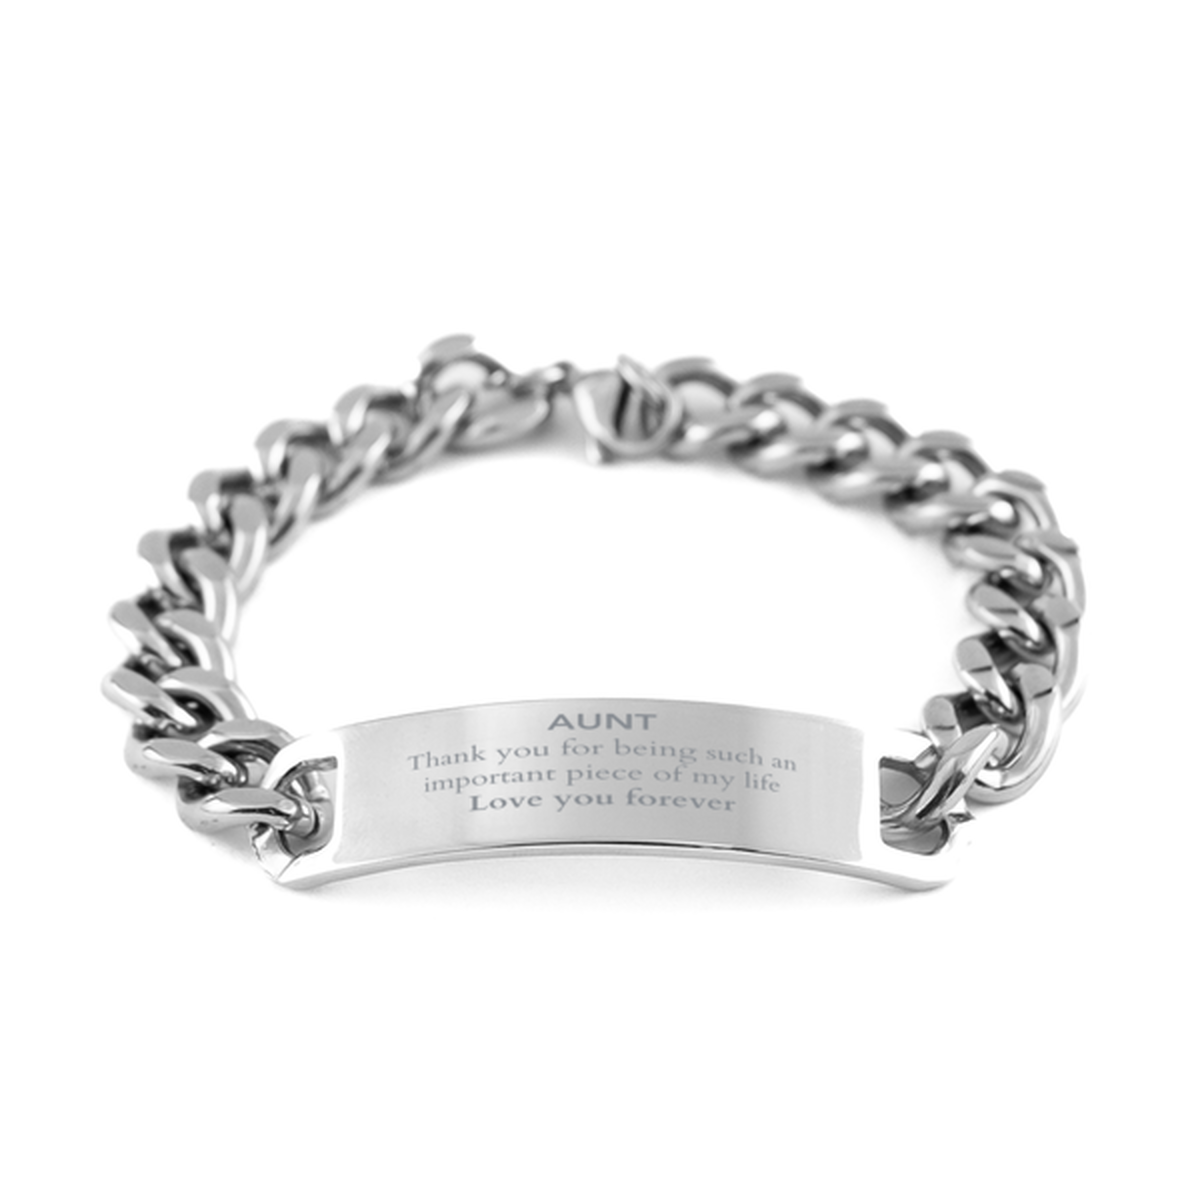 Appropriate Aunt Cuban Chain Stainless Steel Bracelet Epic Birthday Gifts for Aunt Thank you for being such an important piece of my life Aunt Christmas Mothers Fathers Day